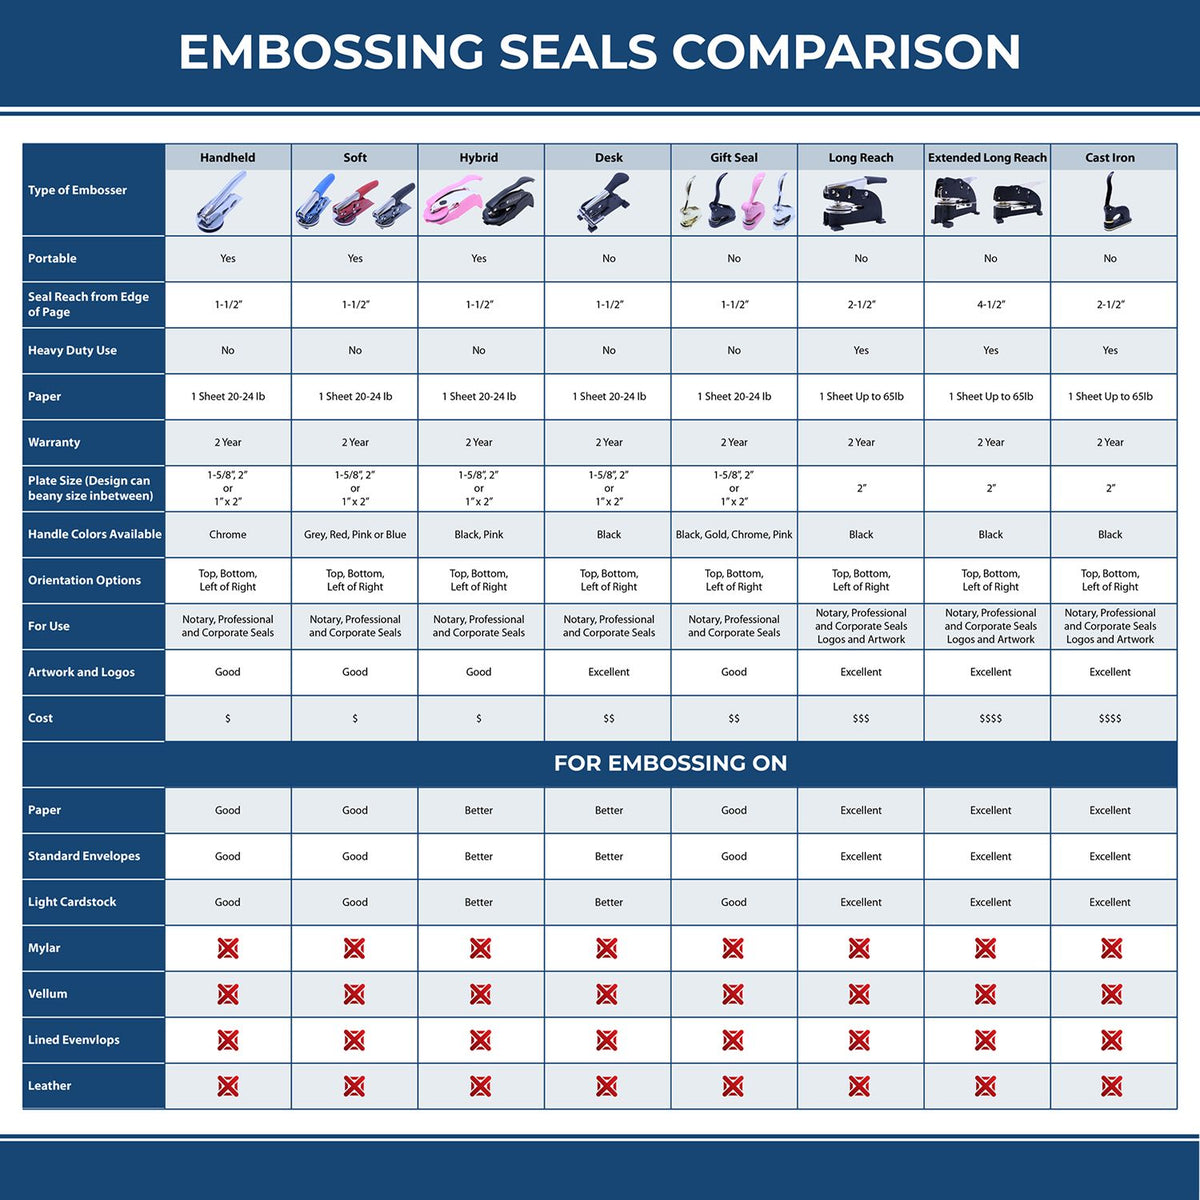 A comparison chart for the different types of mount models available for the Hybrid Texas Land Surveyor Seal